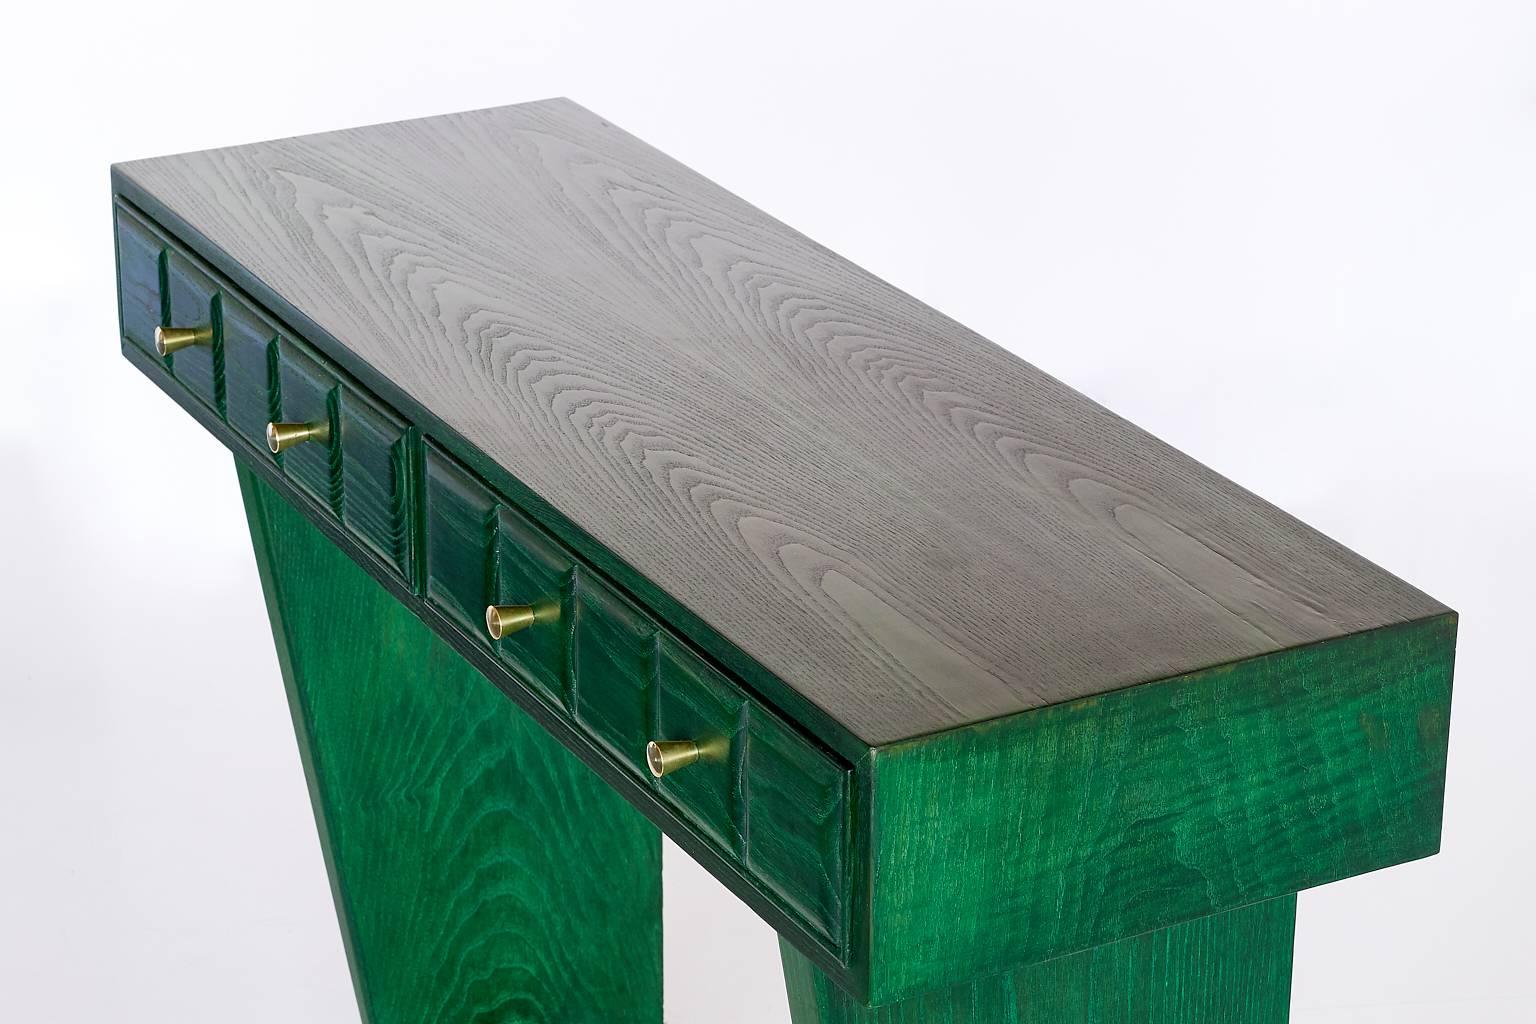 Mid-20th Century Green Italian Art Deco Console Designed for a Florentine Residence